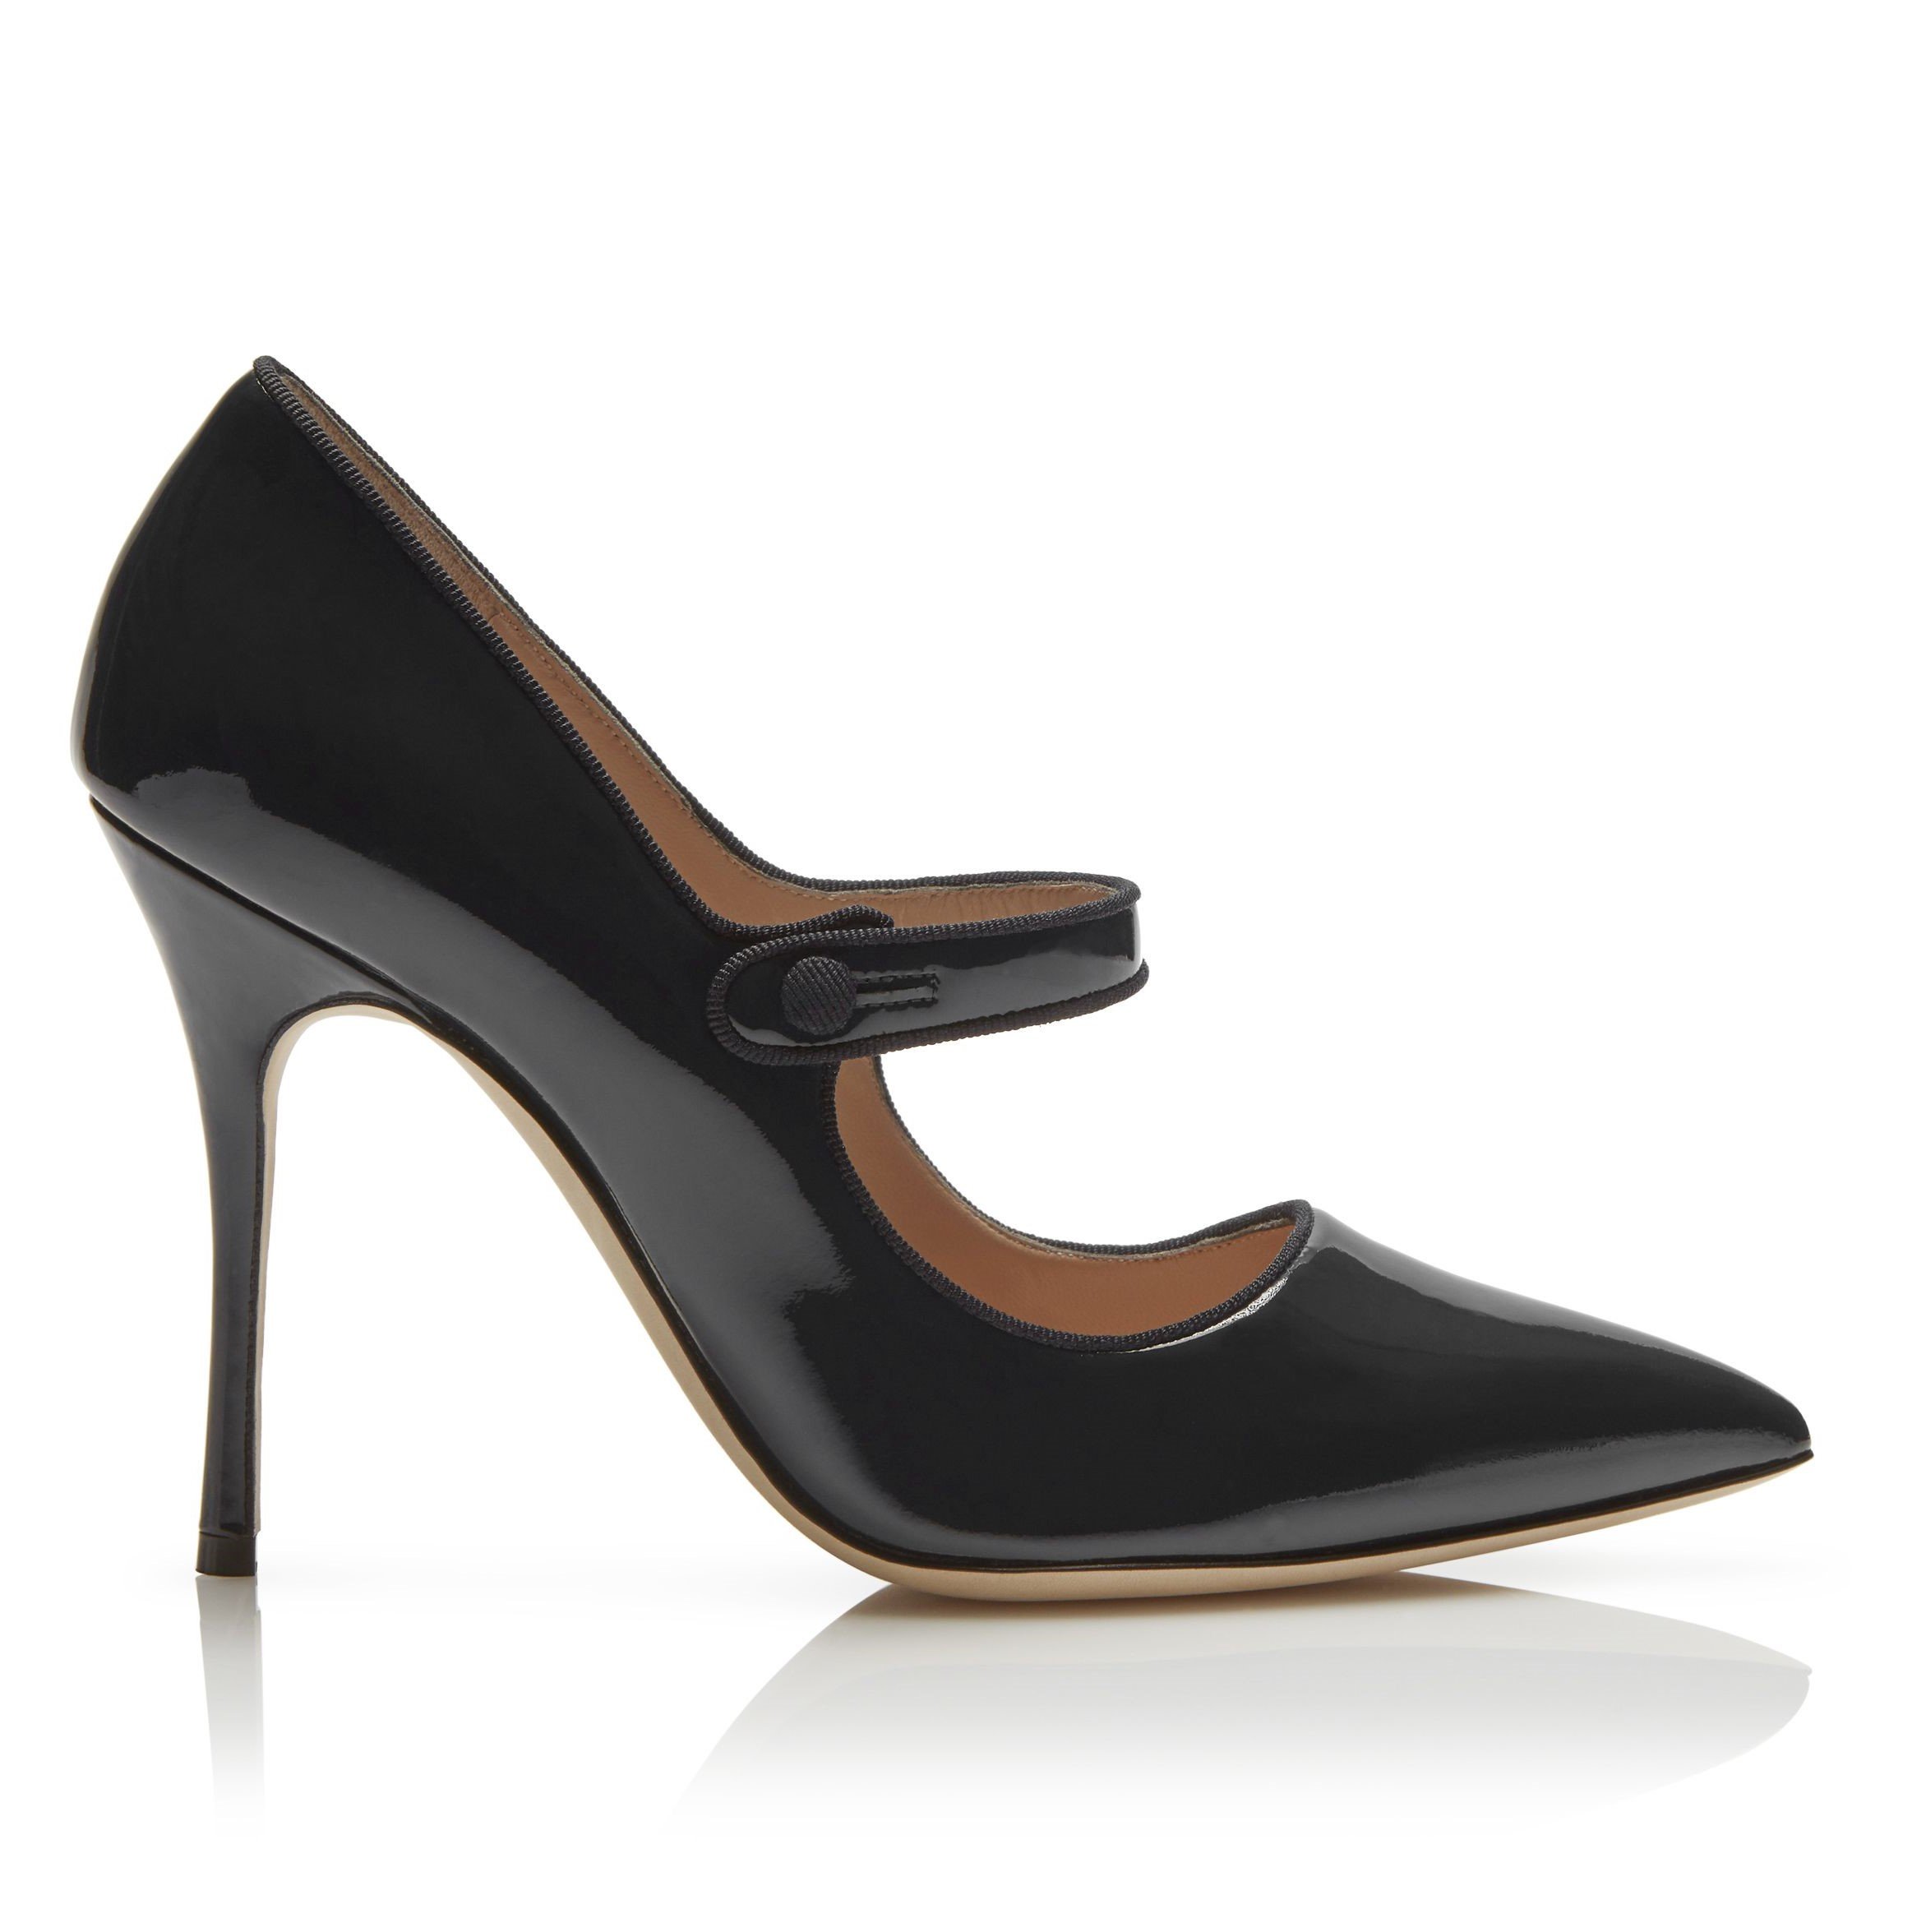 Manolo Blahnik Camparinew Pointed Toe Pumps in Black Patent Leather.jpg